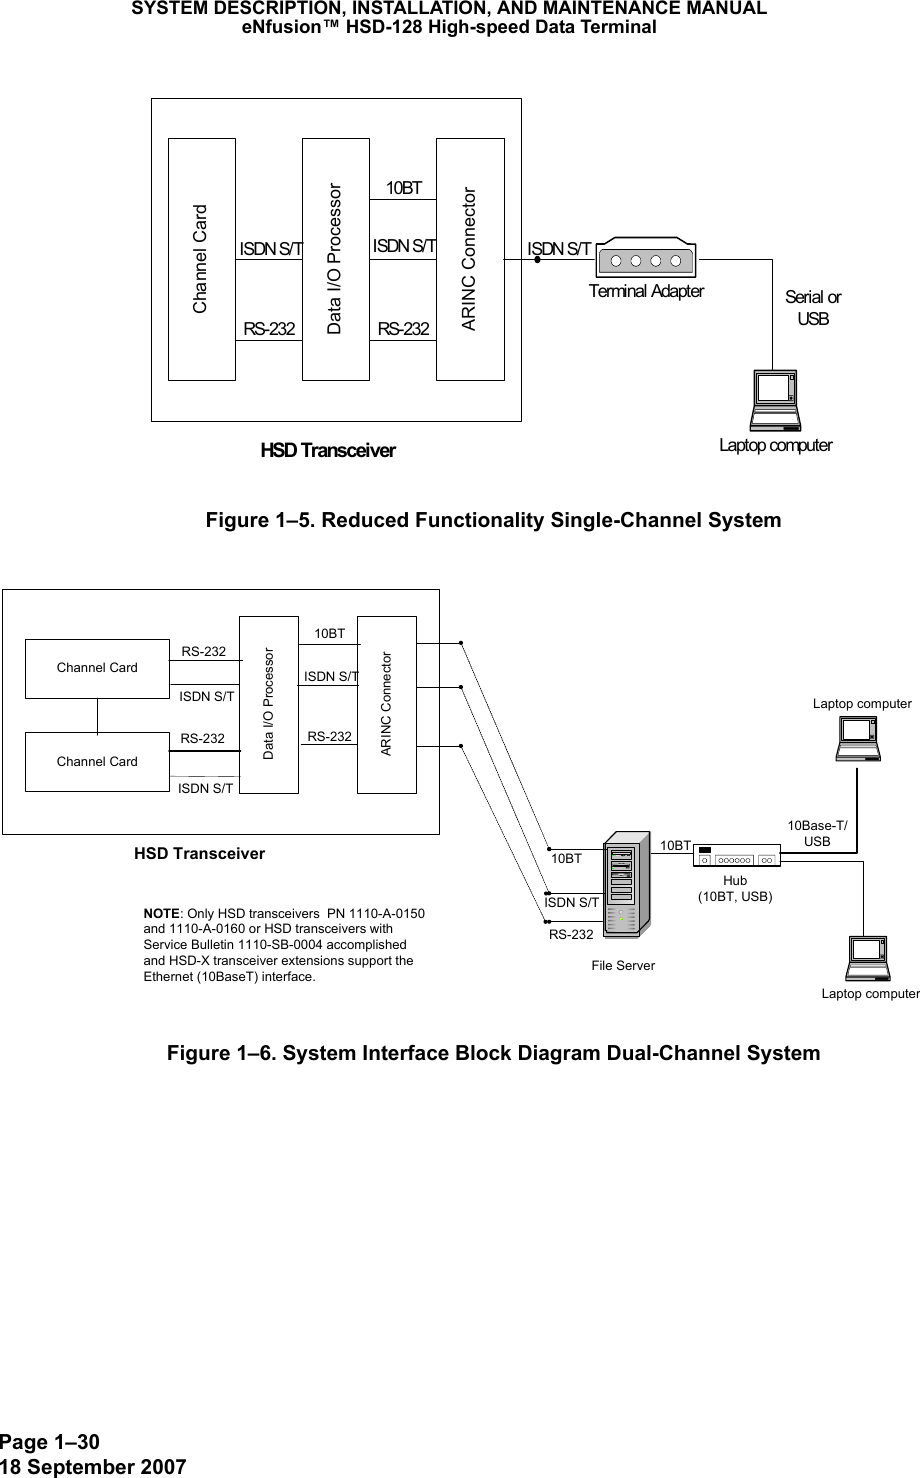 Page 1–3018 September 2007SYSTEM DESCRIPTION, INSTALLATION, AND MAINTENANCE MANUALeNfusion™ HSD-128 High-speed Data TerminalFigure 1–5. Reduced Functionality Single-Channel SystemFigure 1–6. System Interface Block Diagram Dual-Channel SystemChannel CardData I/O ProcessorARINC ConnectorHSD TransceiverISDN S/T ISDN S/TRS-232 RS-23210BTLaptop computerSerial orUSBTerminal AdapterISDN S/THSD TransceiverRS-232File ServerLaptop computerLaptop computerISDN S/T10BT10Base-T/USBHub(10BT, USB)10BTData I/O ProcessorARINC ConnectorISDN S/TISDN S/TRS-232 RS-23210BTChannel CardChannel CardISDN S/TRS-232NOTE: Only HSD transceivers  PN 1110-A-0150and 1110-A-0160 or HSD transceivers withService Bulletin 1110-SB-0004 accomplishedand HSD-X transceiver extensions support theEthernet (10BaseT) interface.